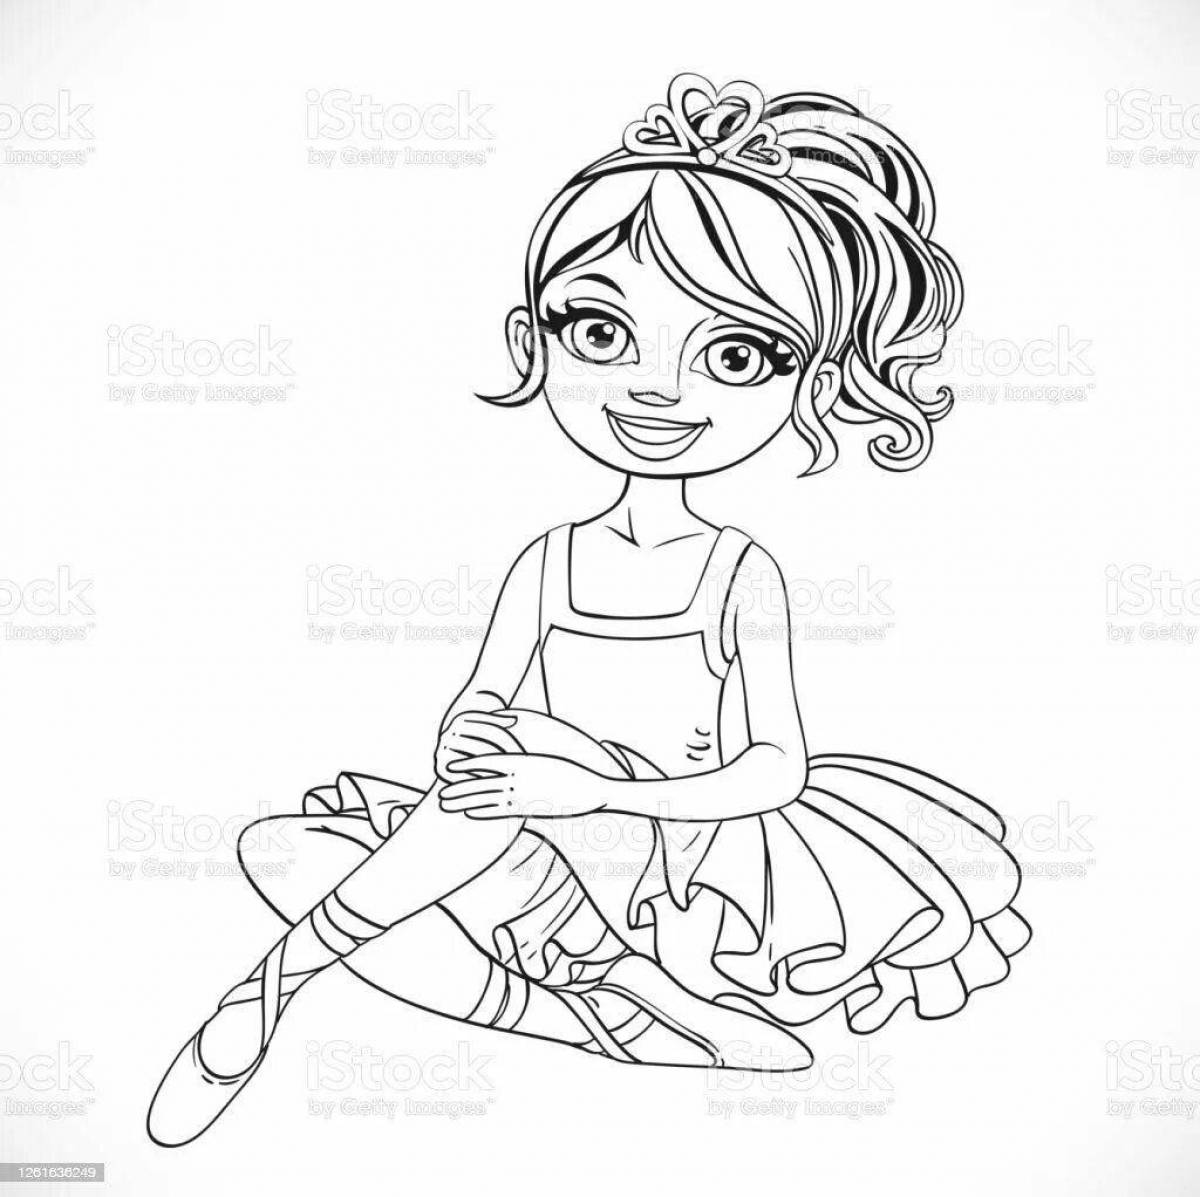 Amazing ballerina coloring page